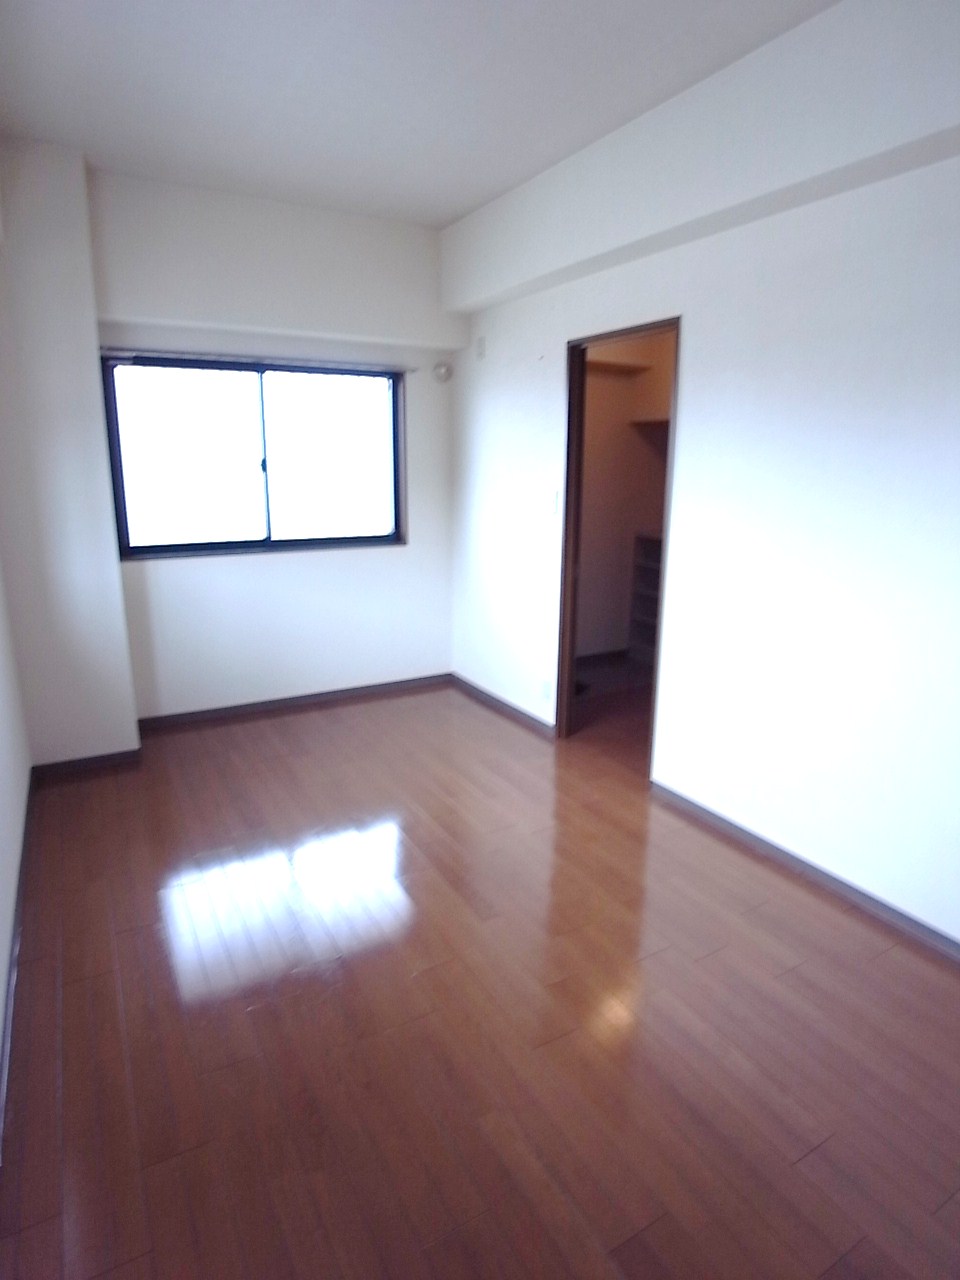 Other room space. North of Western-style